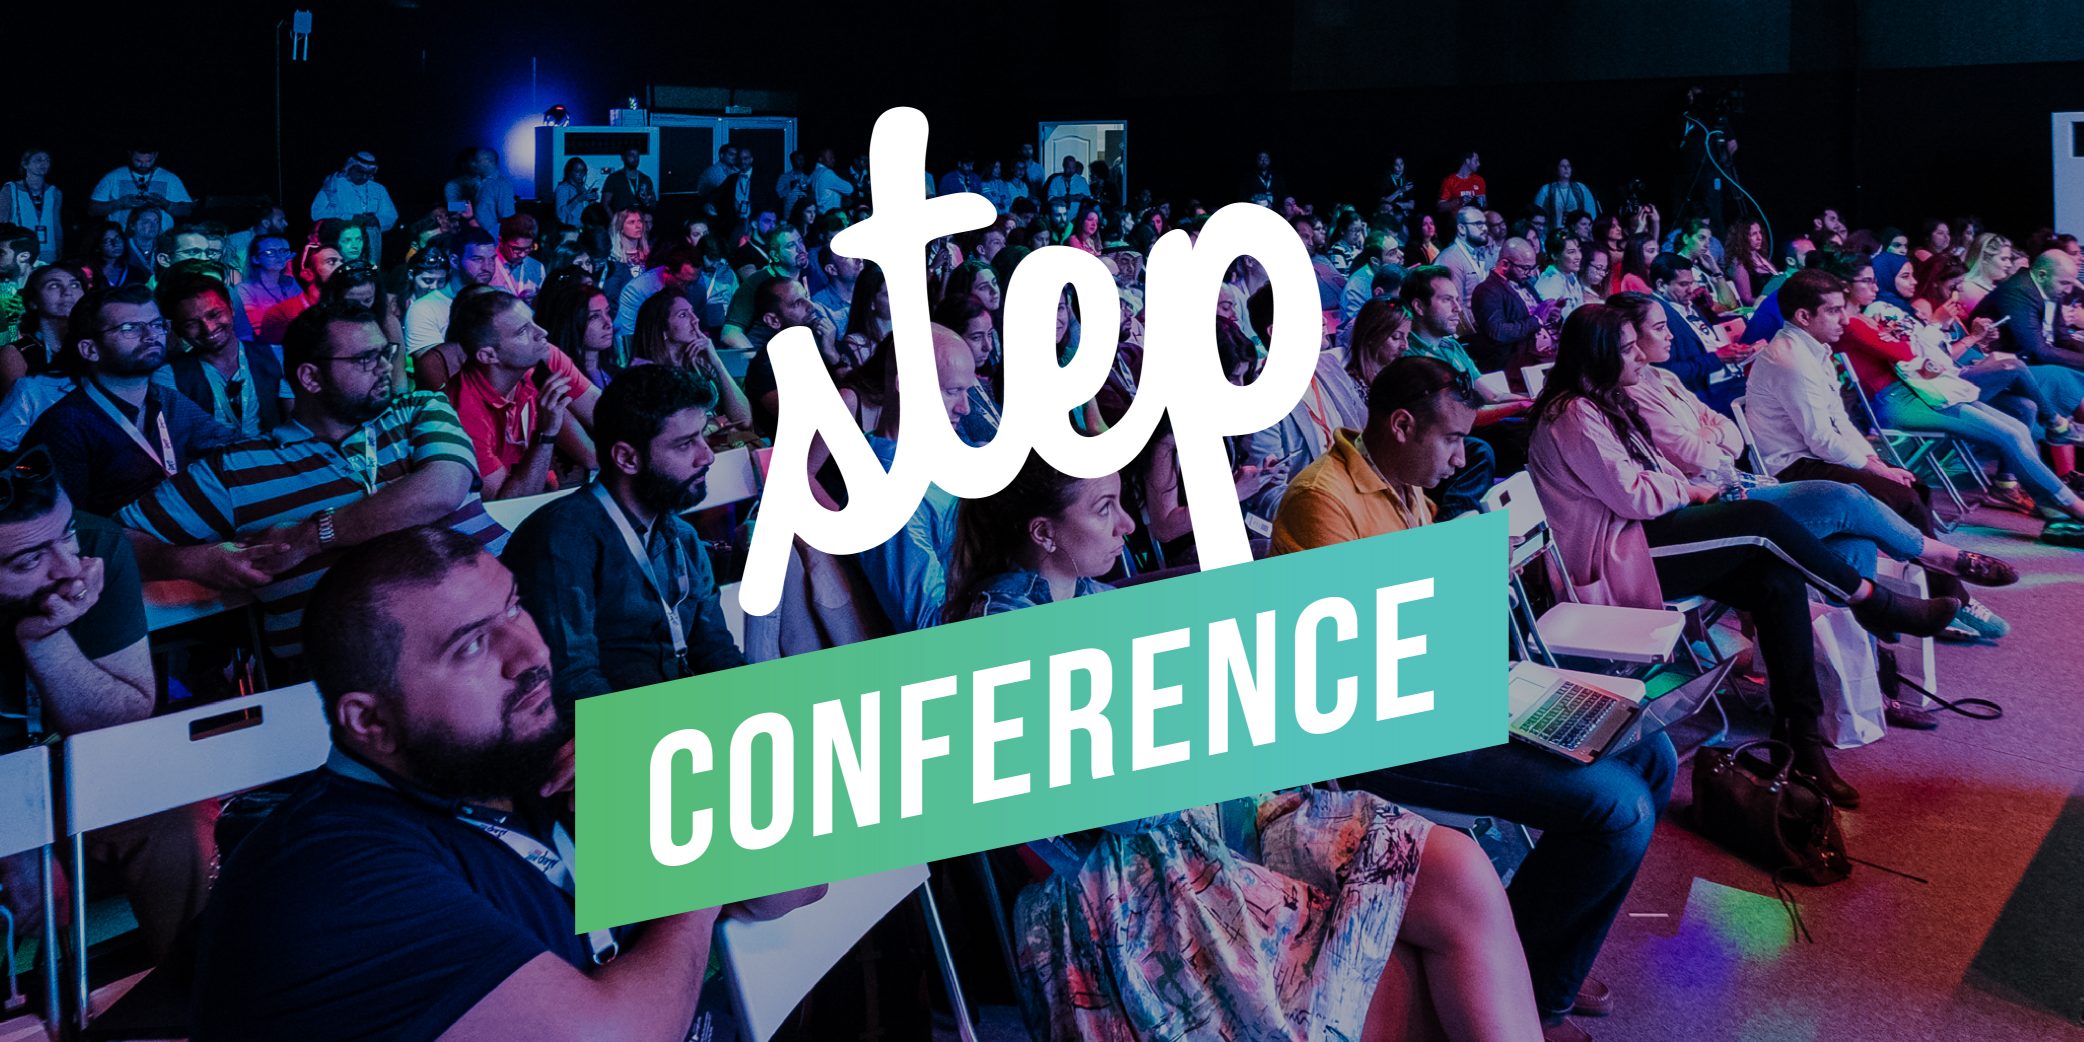 Step Conference 2018